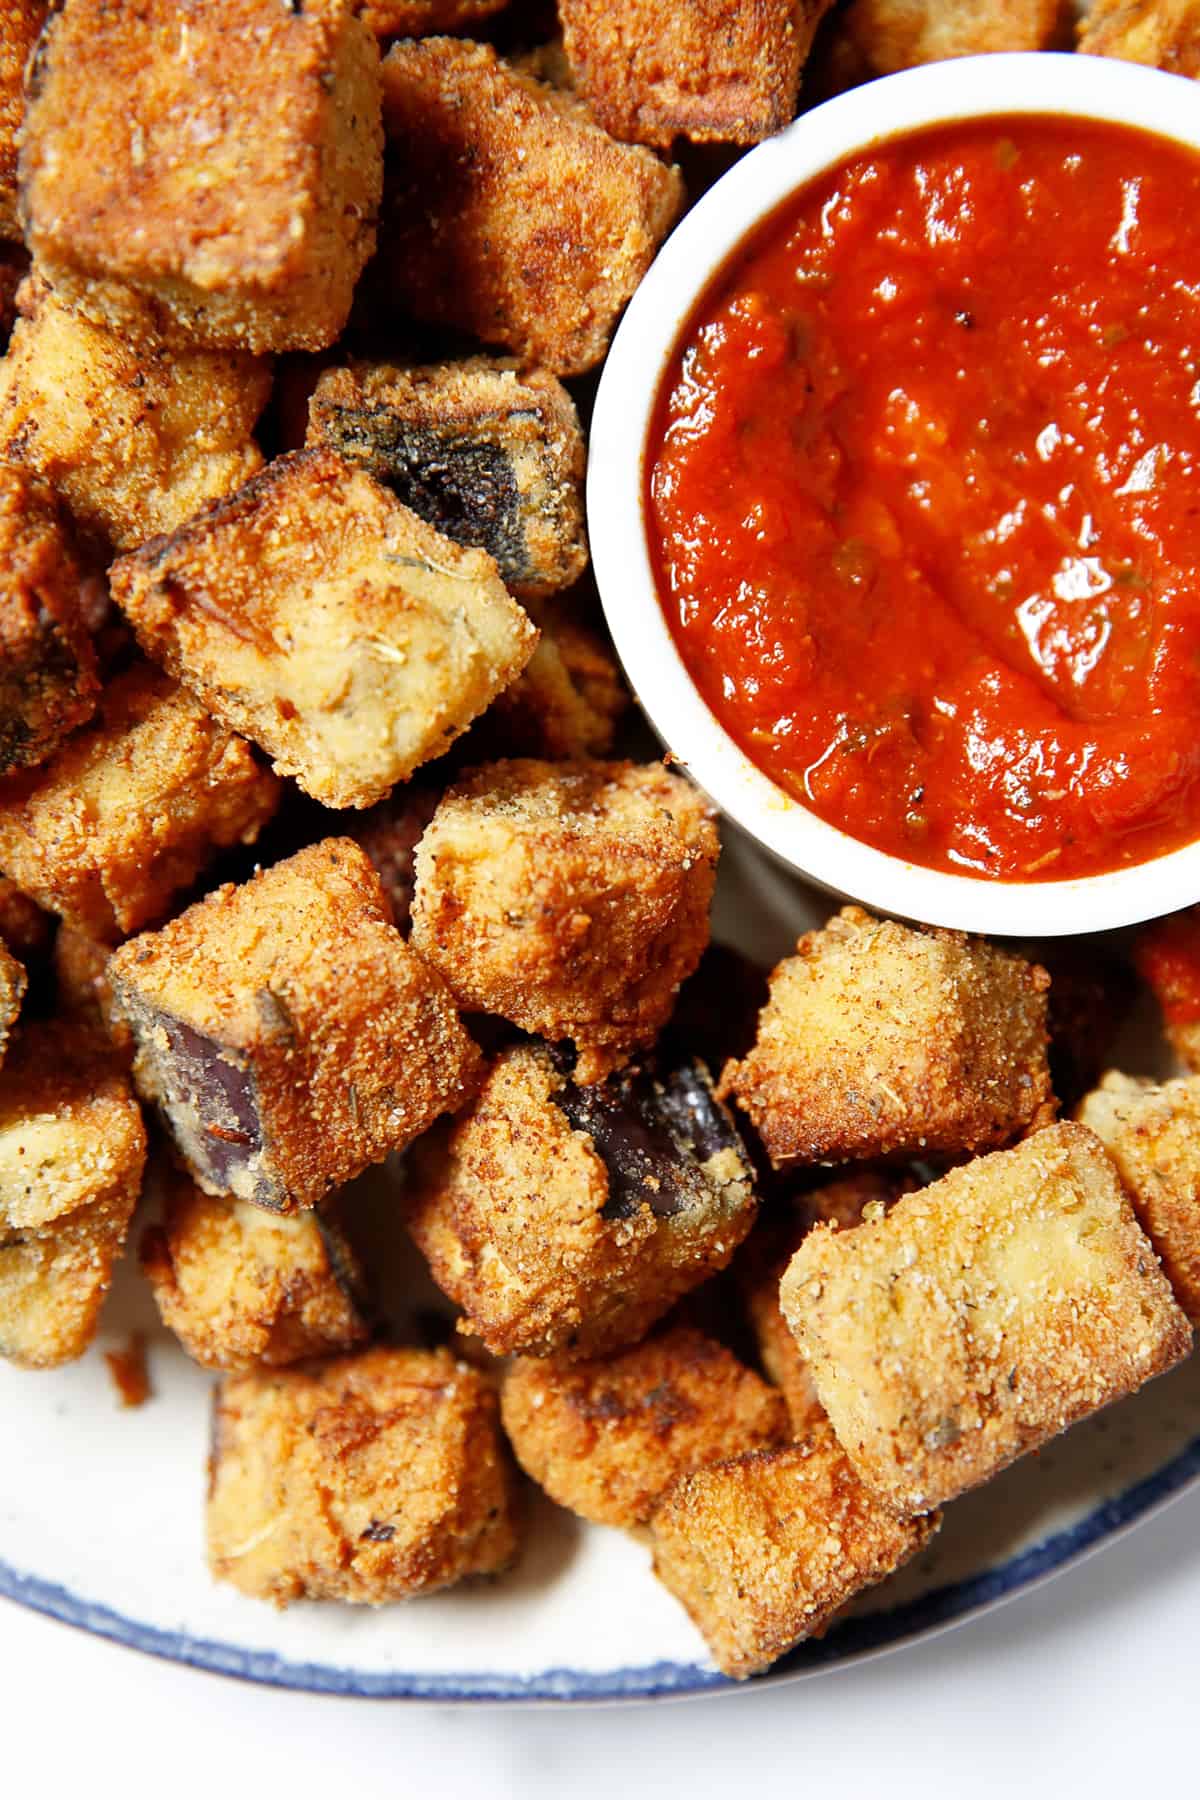 Tasty eggplant Parm bites on a plate with dipping sauce